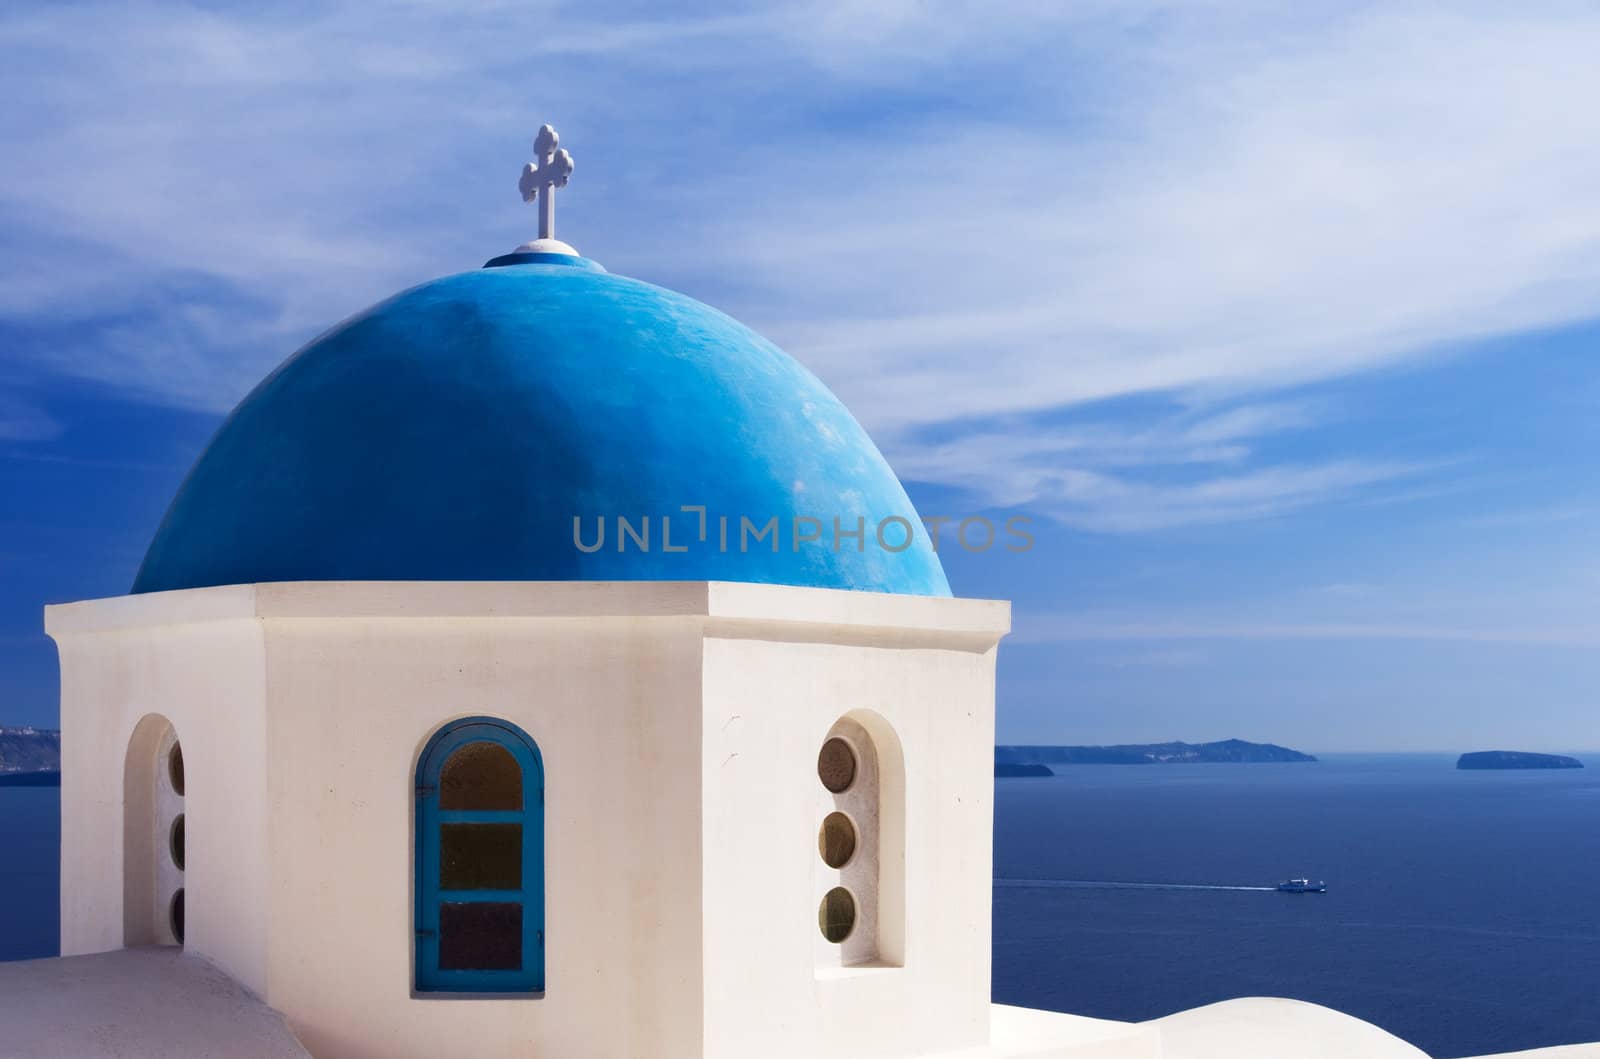 A church with a blue dome overlooks the spectacular caldera surrounding the beautiful island of Santorini, Greece